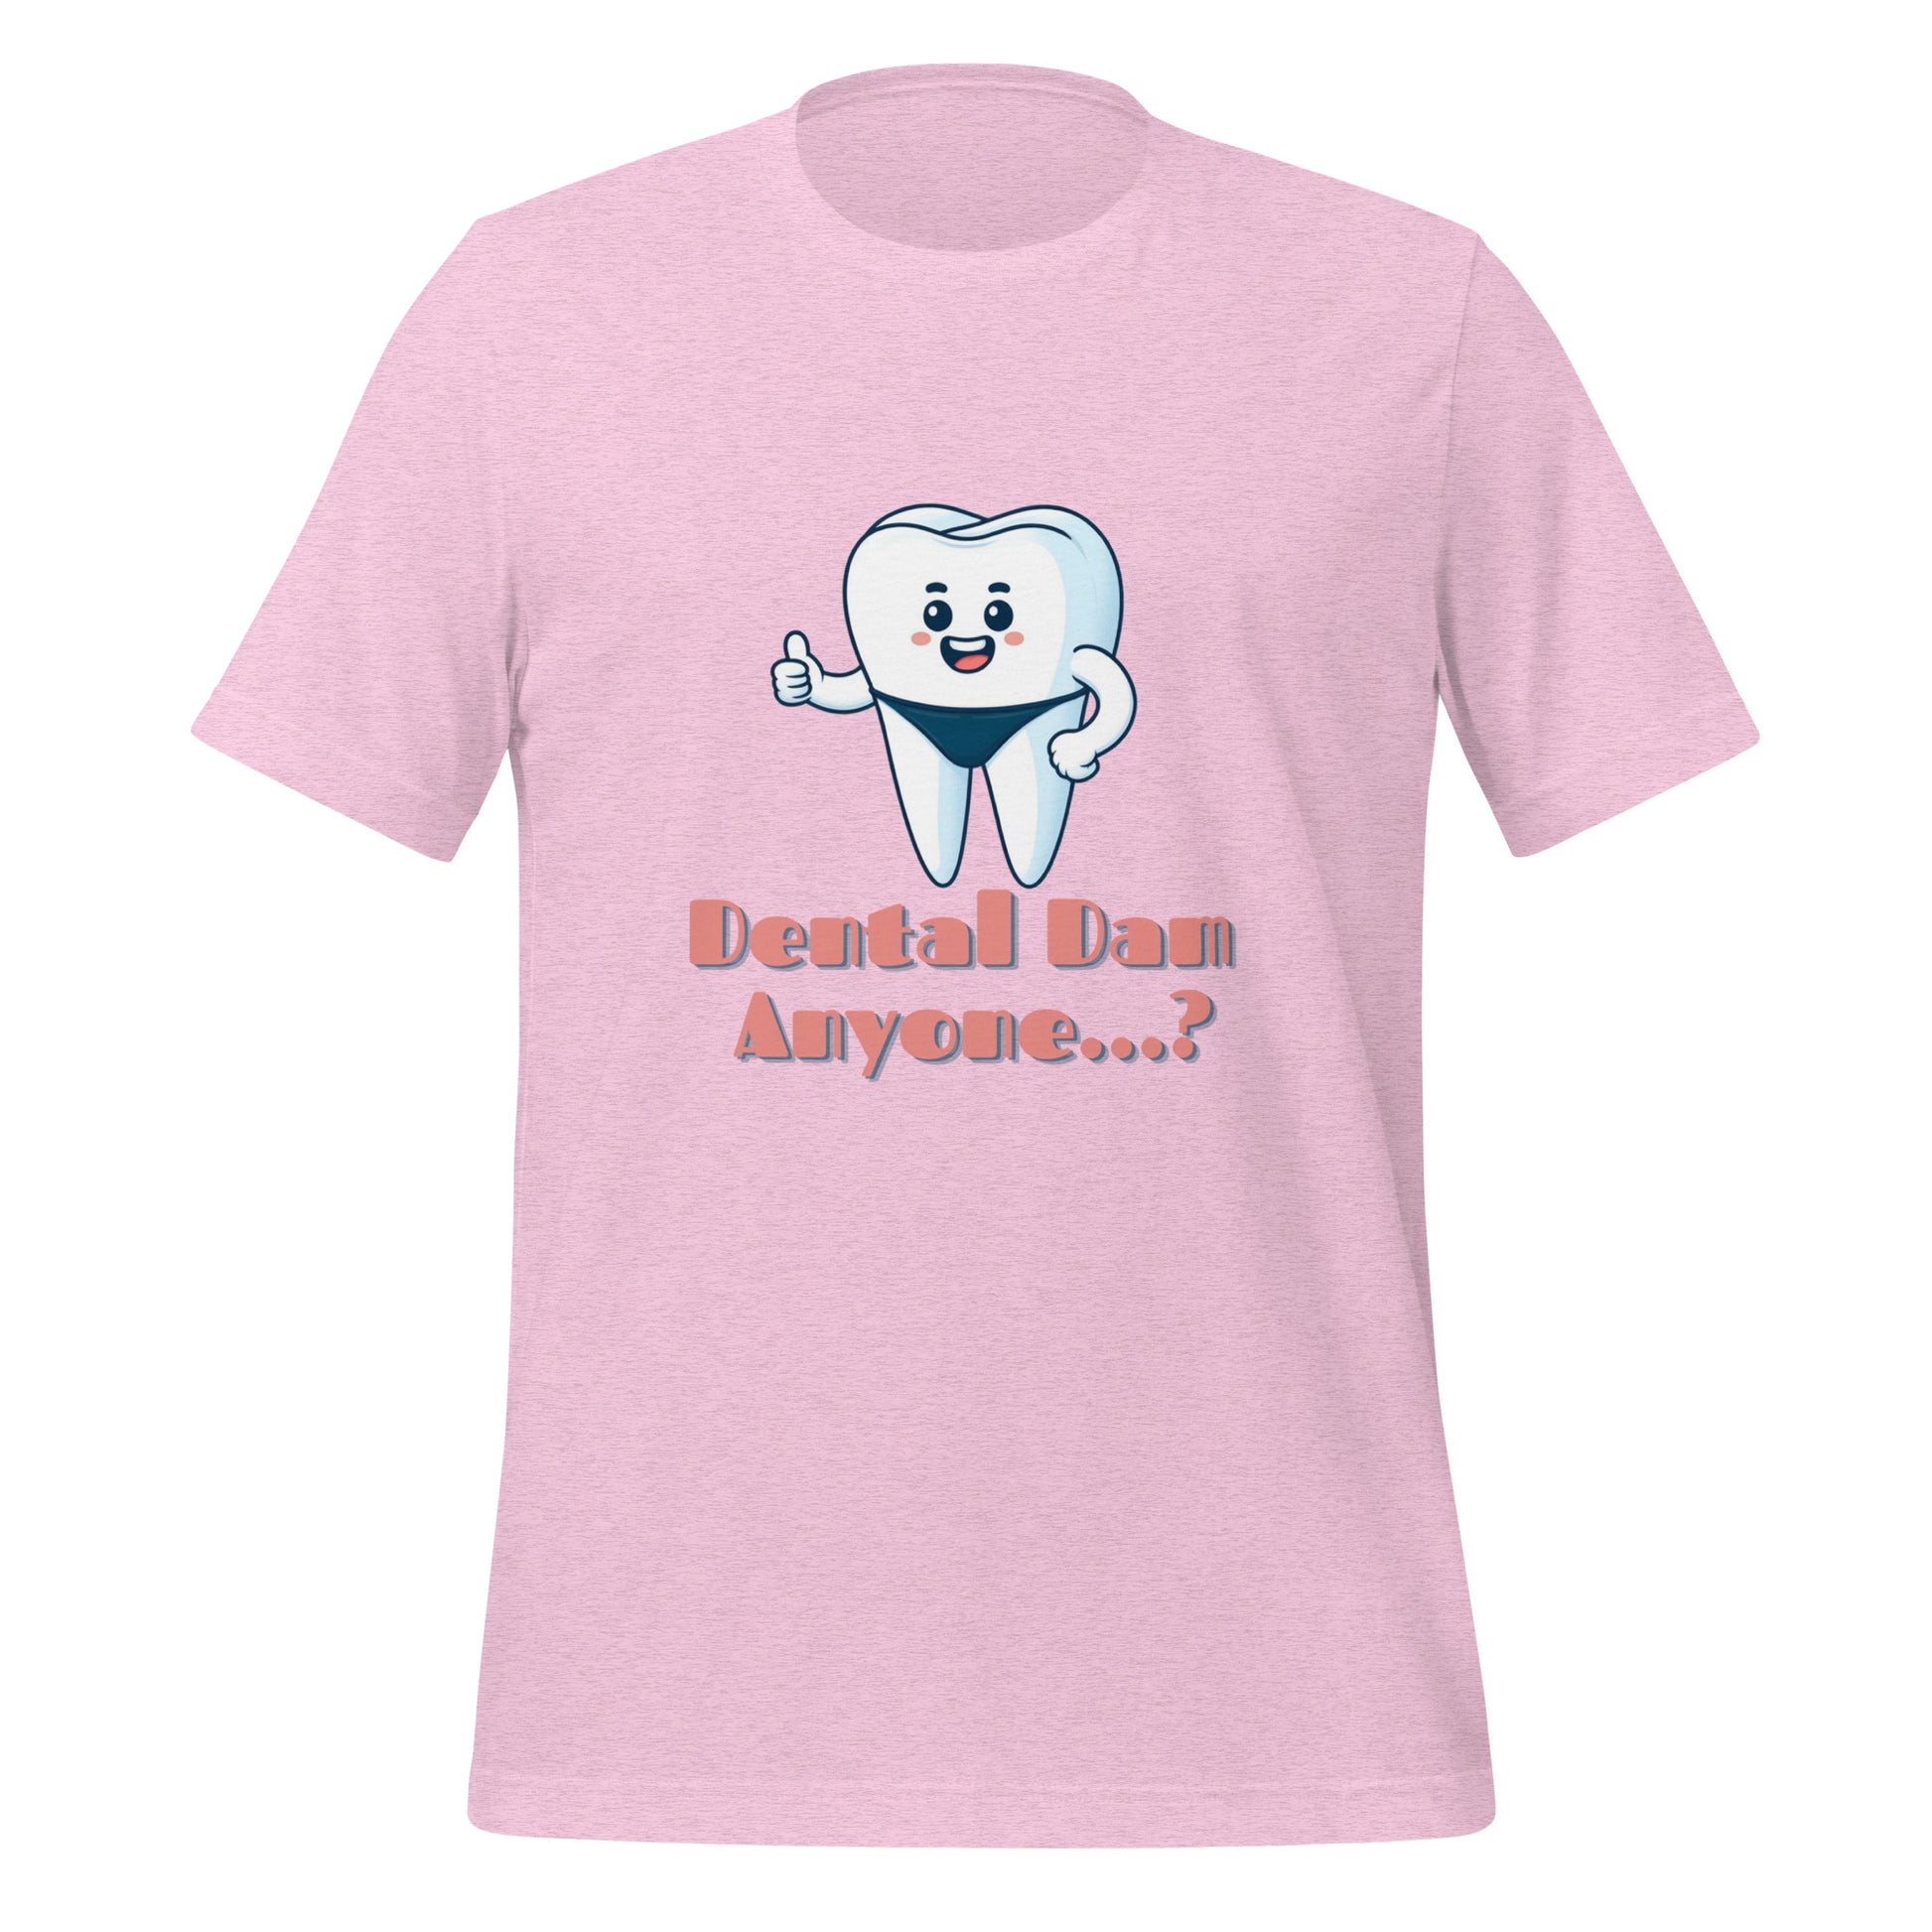 Funny dental shirt featuring a playful tooth character in a speedo with the text ‘Dental Dam Anyone?’, perfect for dentists, dental hygienists, and dental students who enjoy dental humor. This dental shirt is a unique addition to any dental professional’s wardrobe, making it an ideal dental office shirt. Don’t miss out on our dental assistant shirts and dental hygiene shirts. Heather prism lilac color.